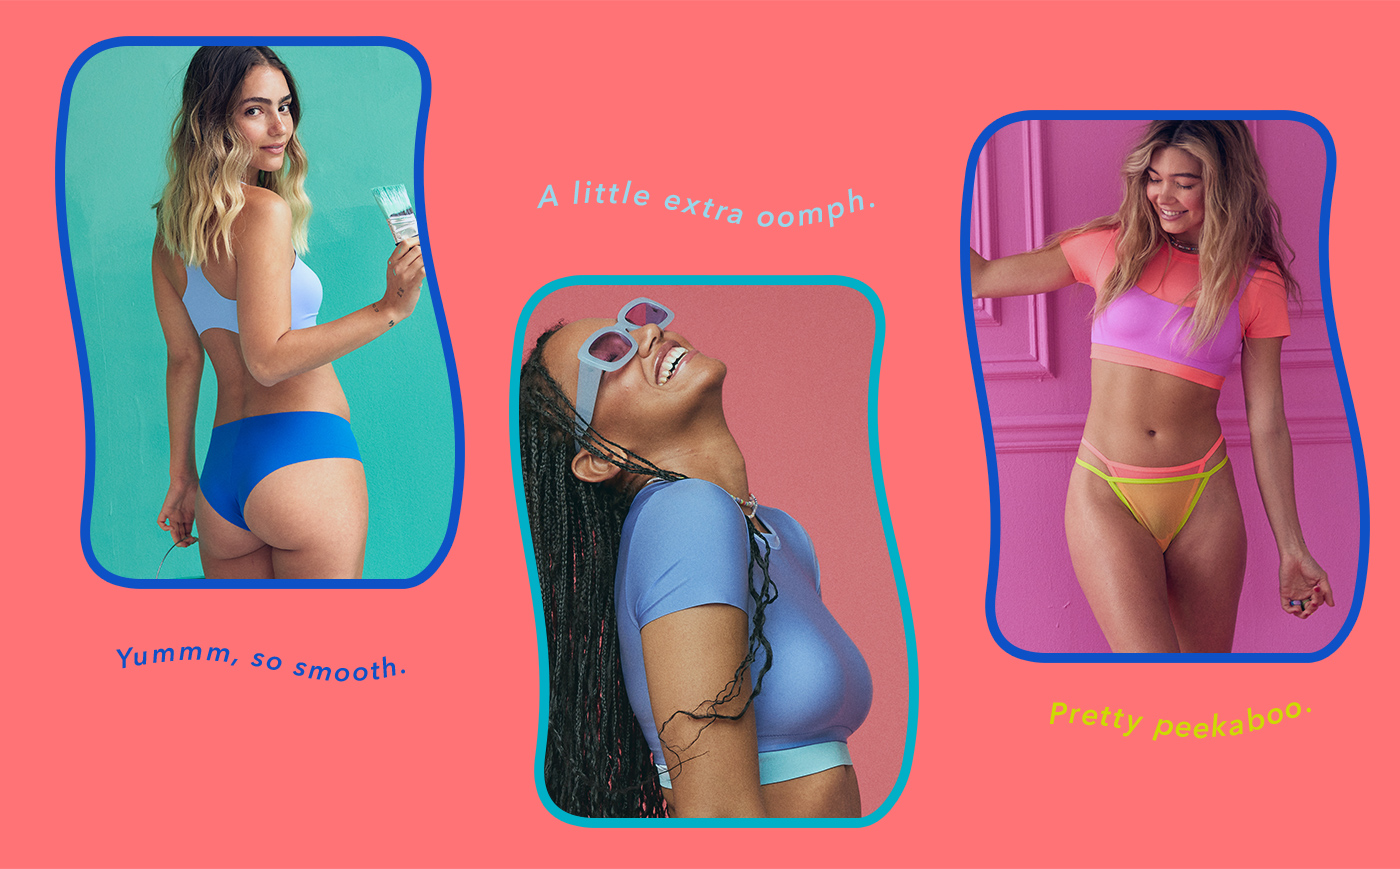 Aerie SMOOTHEZ Review  What's Anti-Shapewear?? 